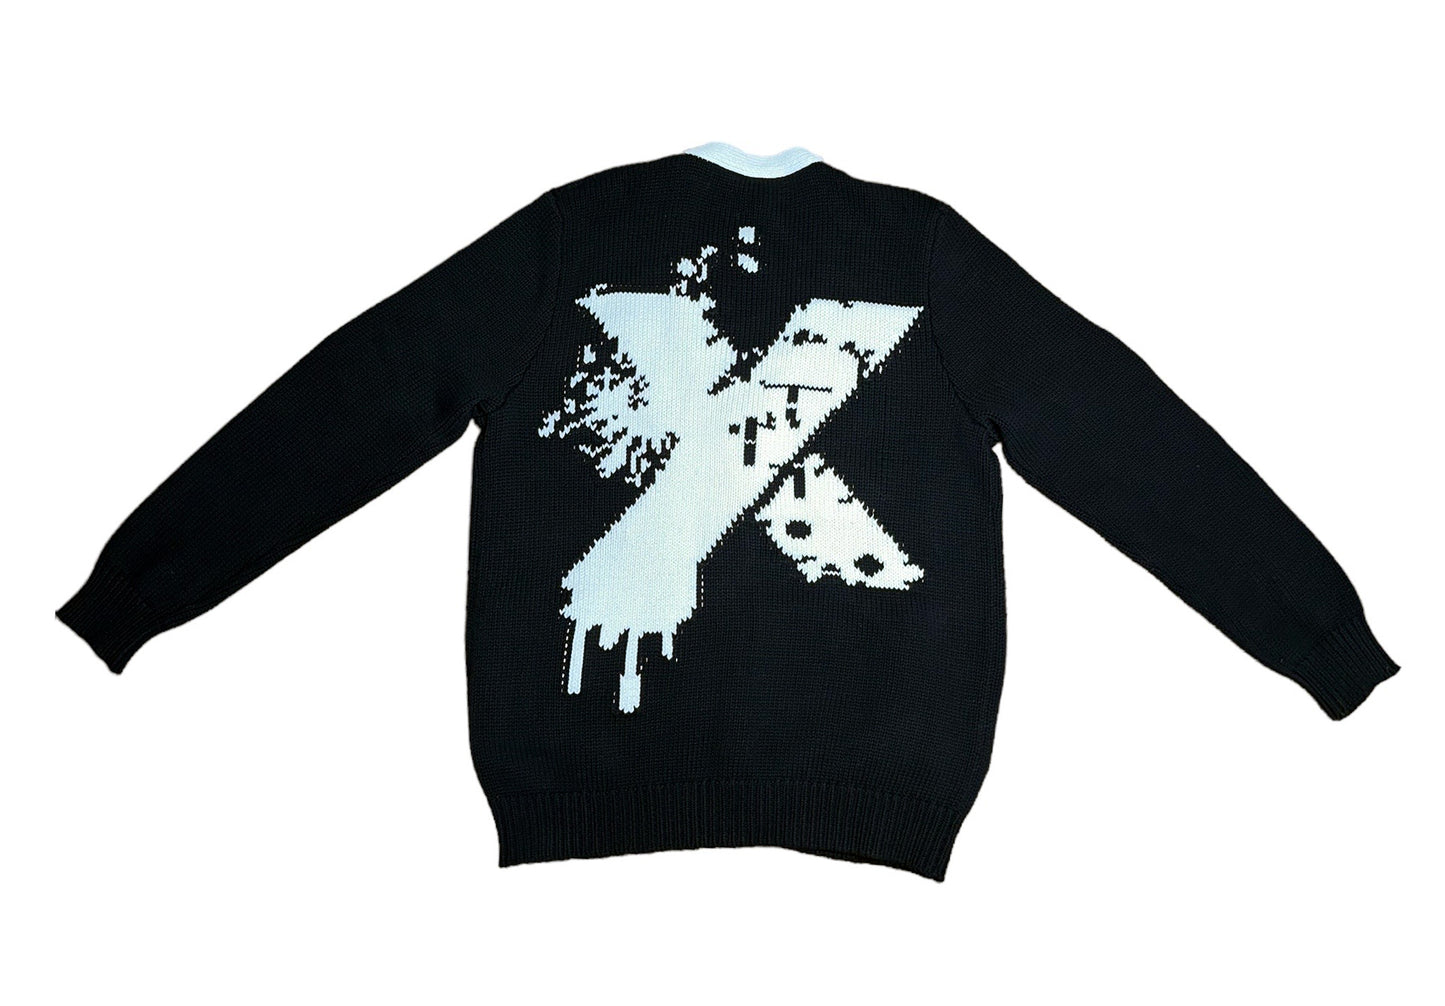 ANY MEANS Malcolm X 1965 Varsity Knitted Cardigan